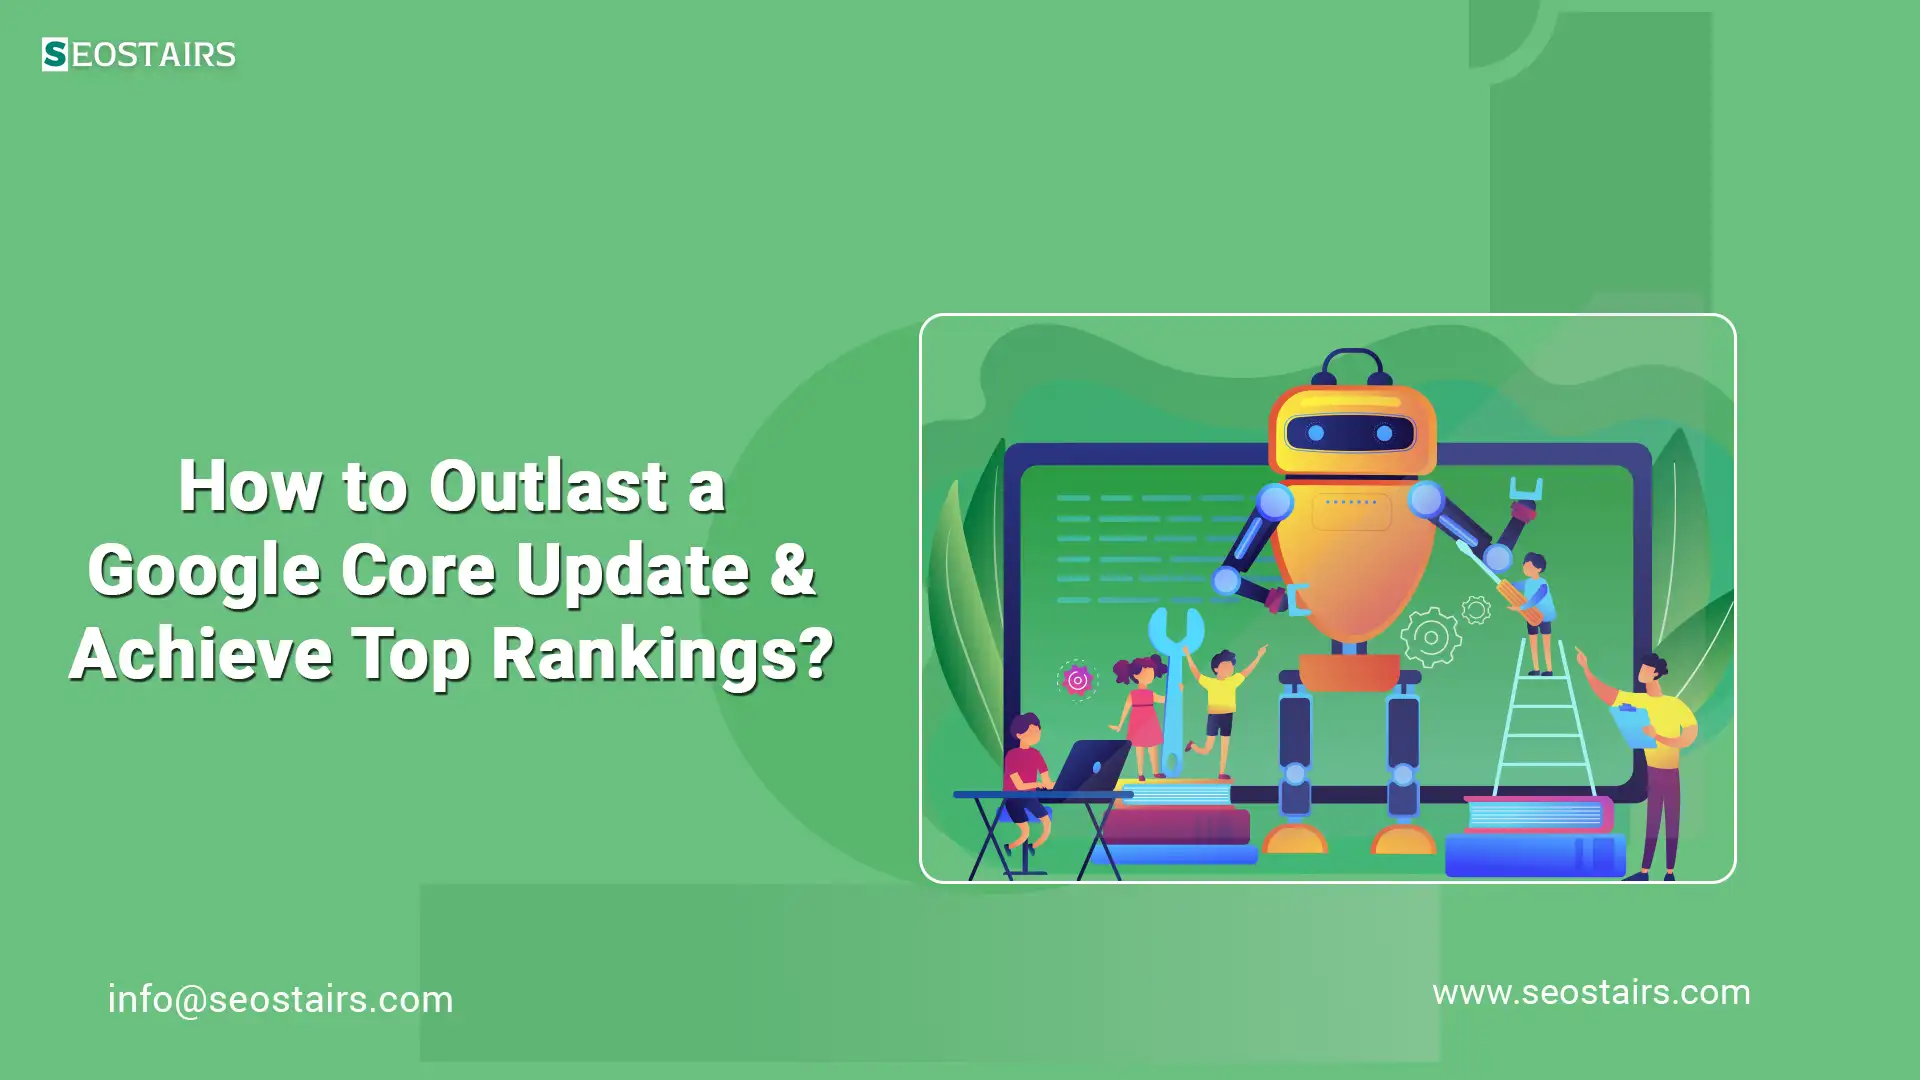 How to Outlast a Google Core Update and Achieve Top Rankings